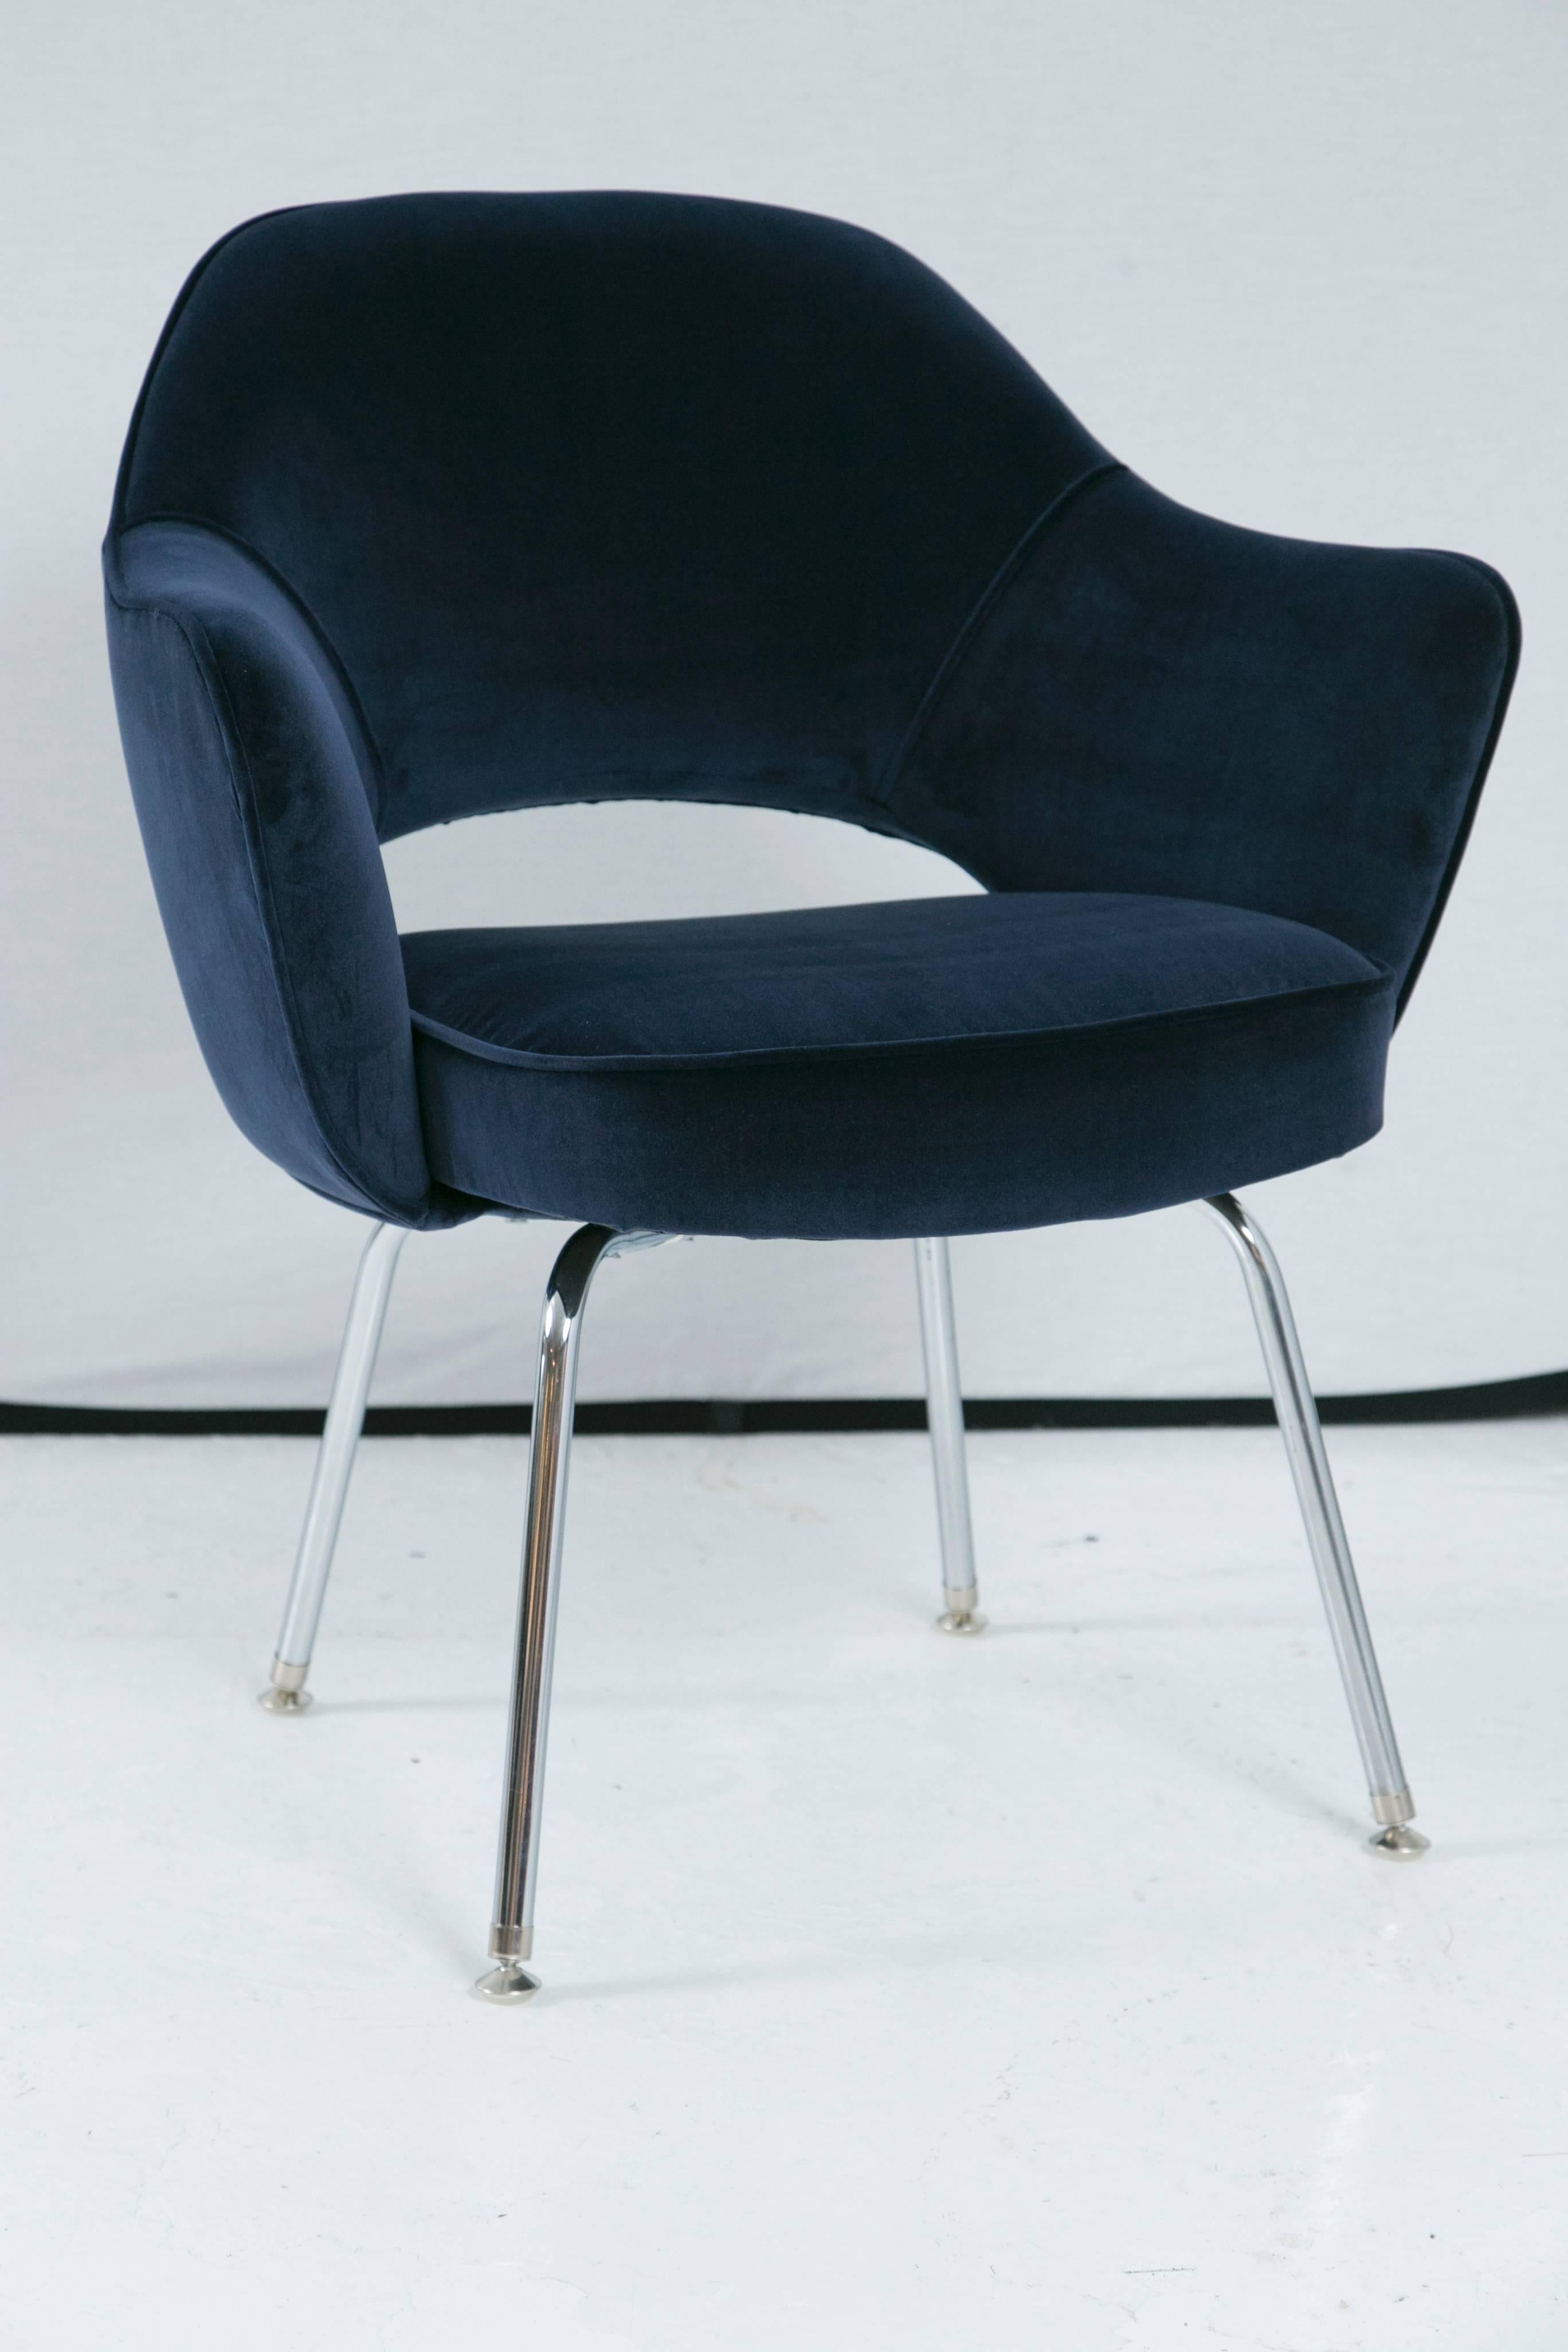 Montage has been restoring Saarinen Executive chairs for years in every fabric one can imagine, right in our very own workroom. We’ve restored these chairs using a stunning Italian Velvet in Navy. Skilled craftsmen bring each chair back to life to